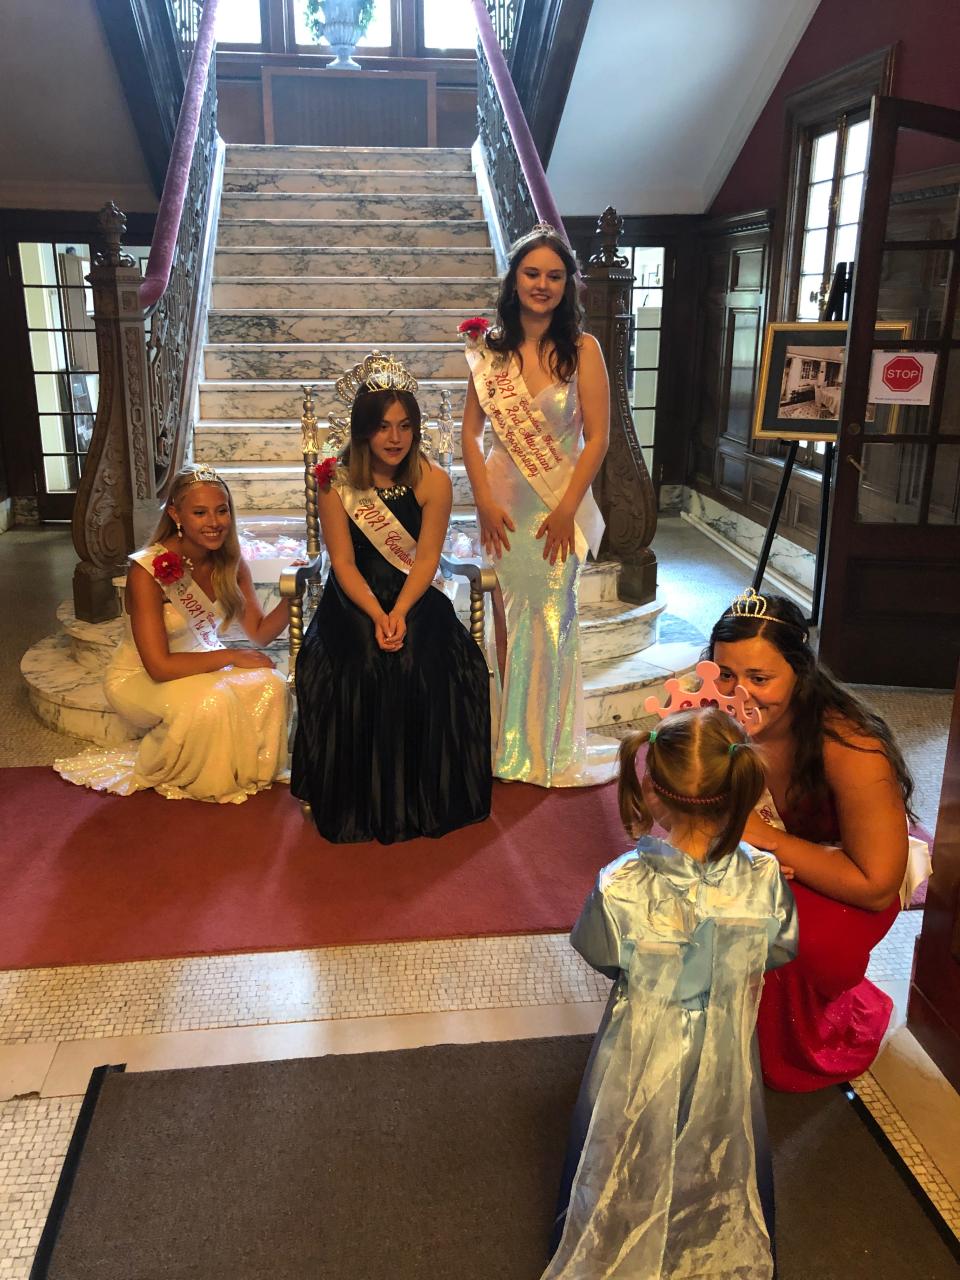 Torrie Forrest, 2021 Carnation Festival queen, and her court welcomed and took photos with little girls who came Sunday, June 24, 2022, to "A Royal Afternoon at The Castle" event at Glamorgan Castle in Alliance. Her court includes First Attendant Madeline Davis, Second Attendant and Miss Congeniality Bethany Caruthers and Third Attendant Leah Spinger. Here, they are meeting 3-year-old Madison Cribb of Ravenna.